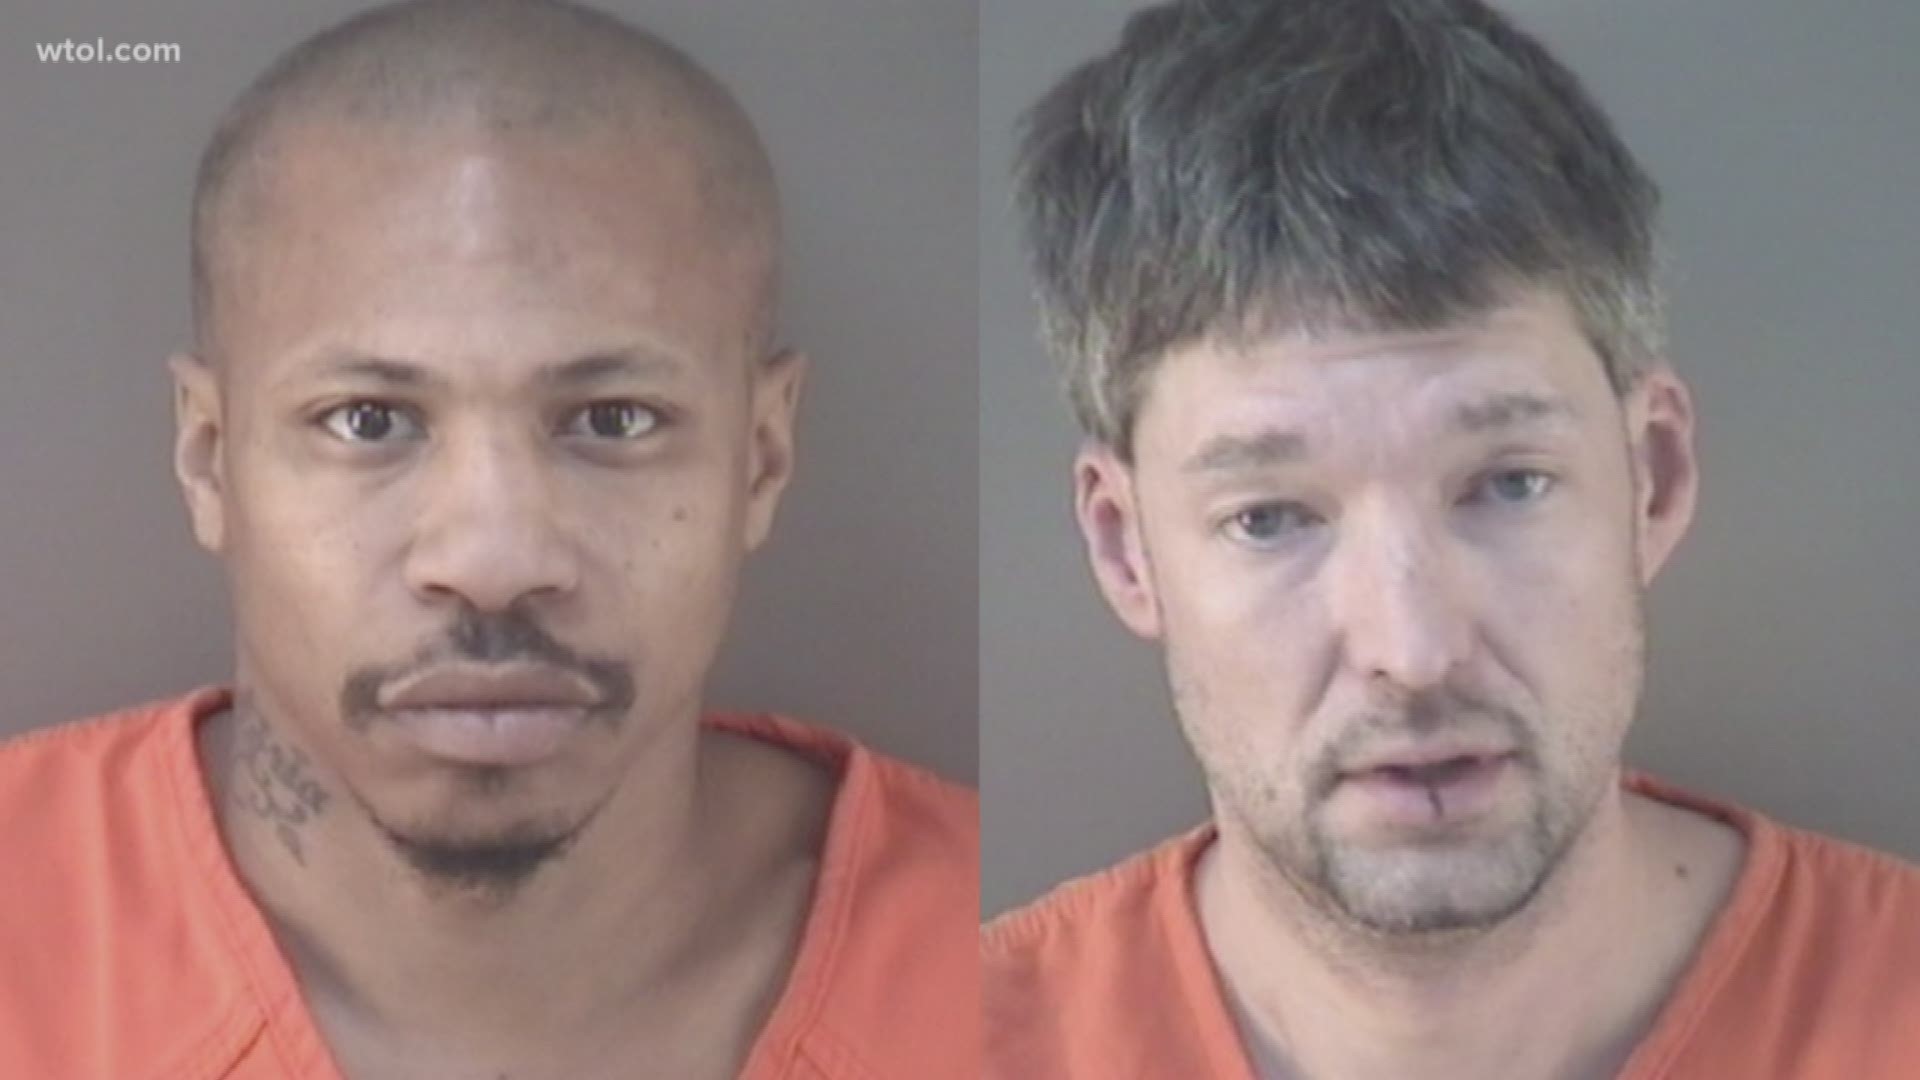 Suspects are accused of driving wrong way on Anthony Wayne Trail.